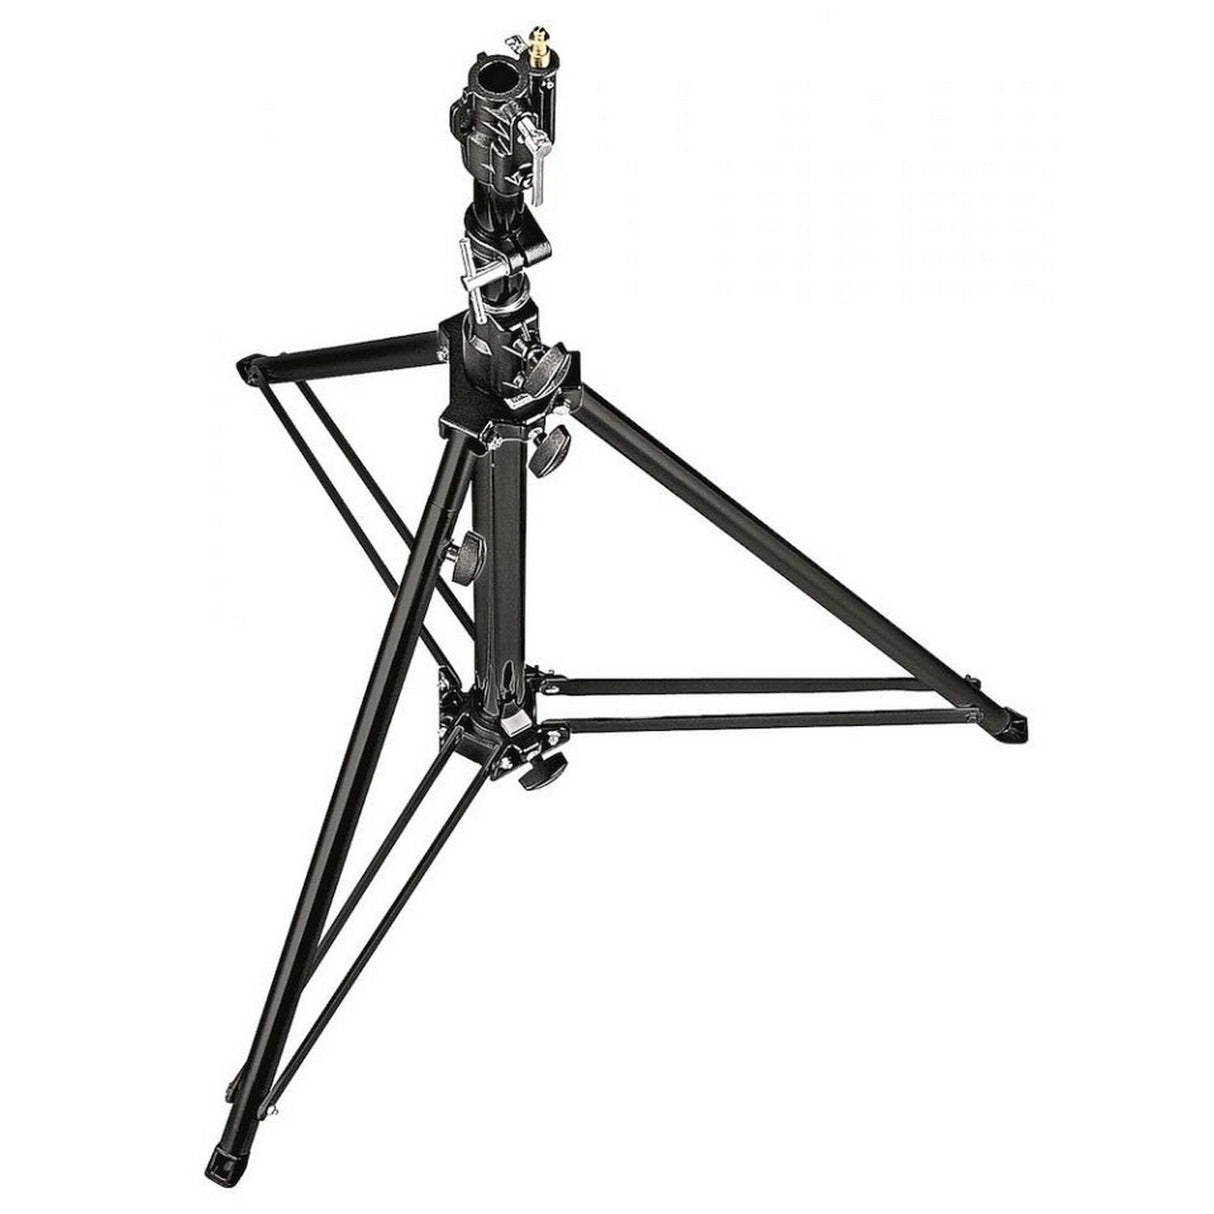 Manfrotto 070BU Aluminum Follow Spot Stand with Leveling Leg